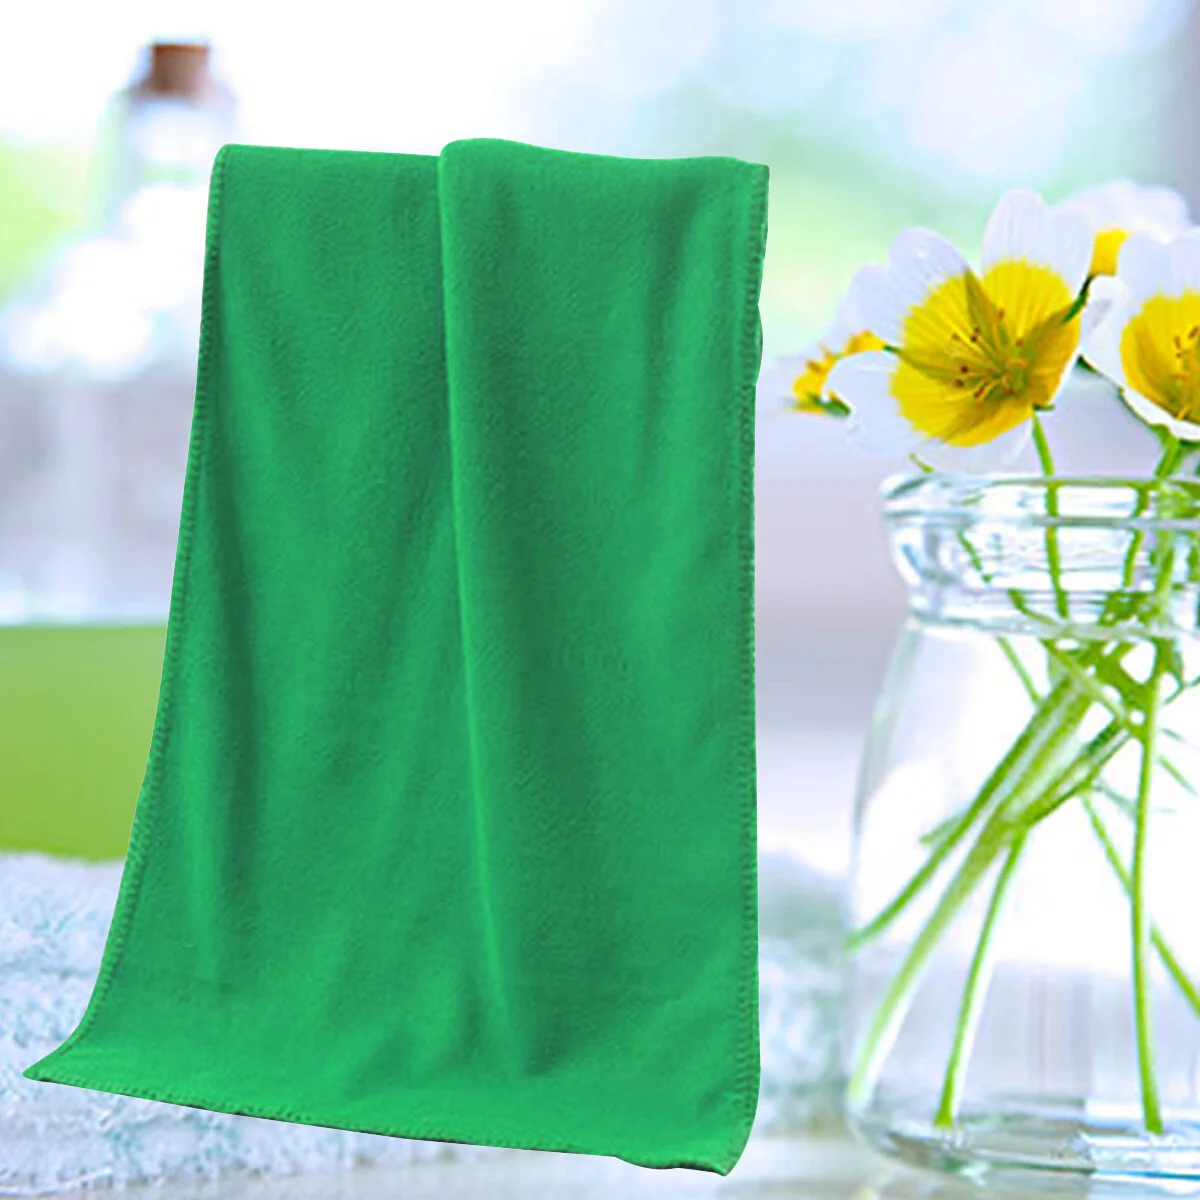 

5Pcs 30x70cm Microfiber Cleaning Cloth Car Wash Towel Rags Kitchen Dish Towel Drying Absorber Household Cleaner for Polishing